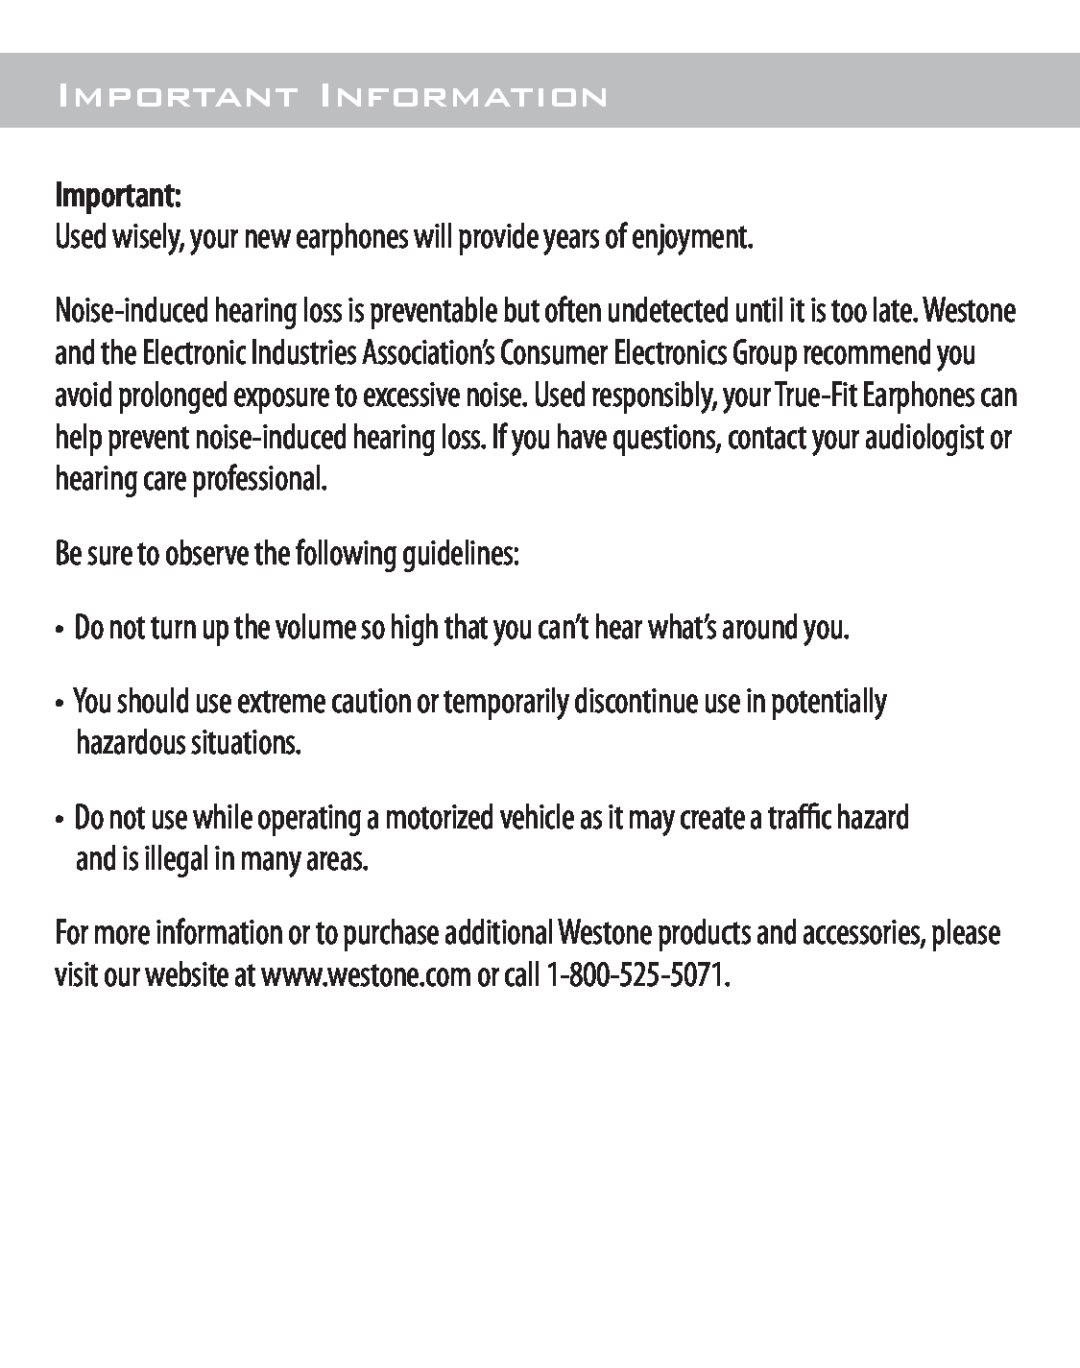 Westone Laboratories WESTONE3, Westone 4 warranty Important Information, Be sure to observe the following guidelines 